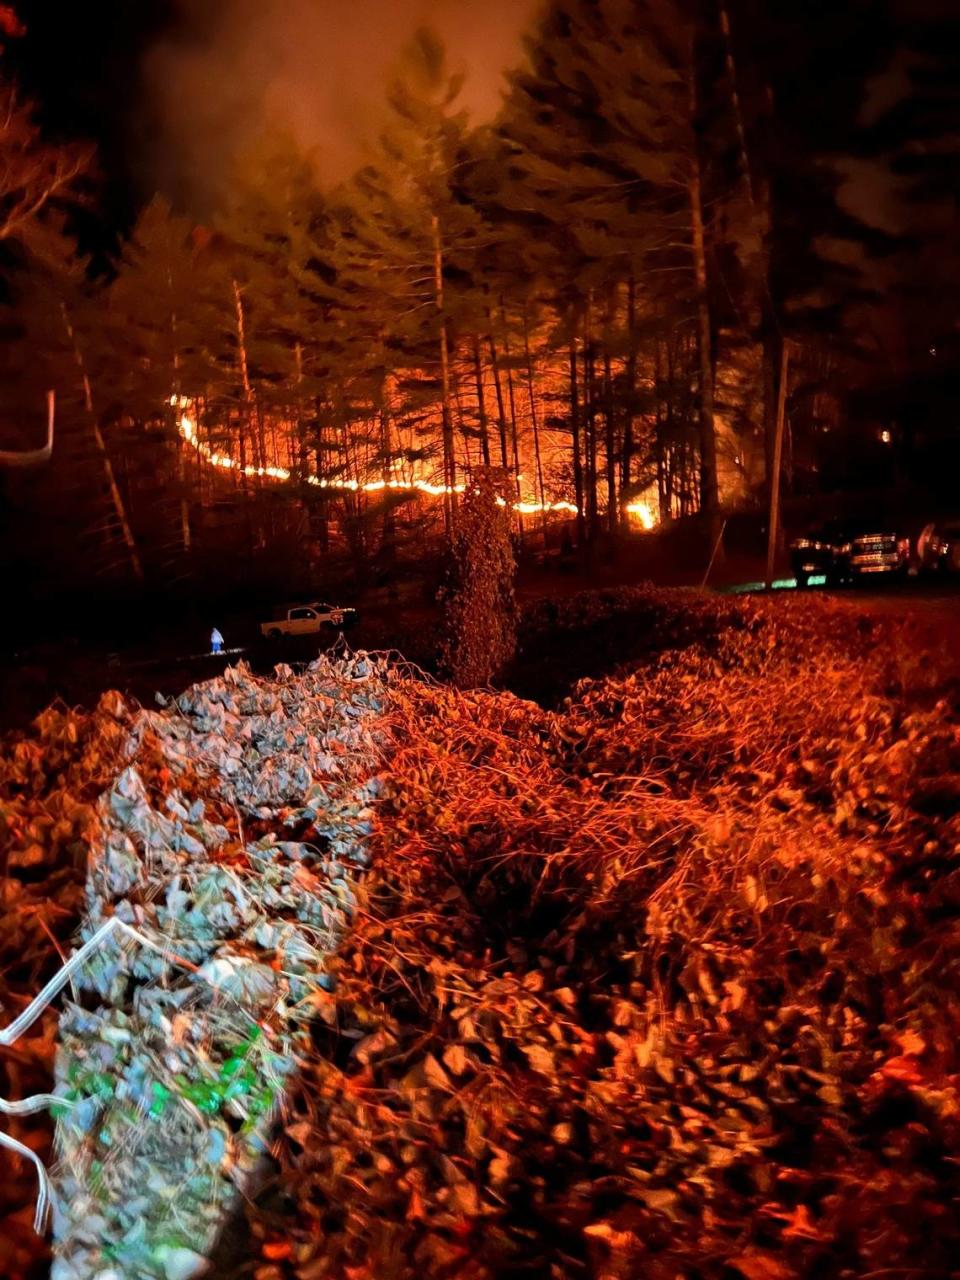 Harlan County officials declared a state of emergency this week due wildfires like this one.